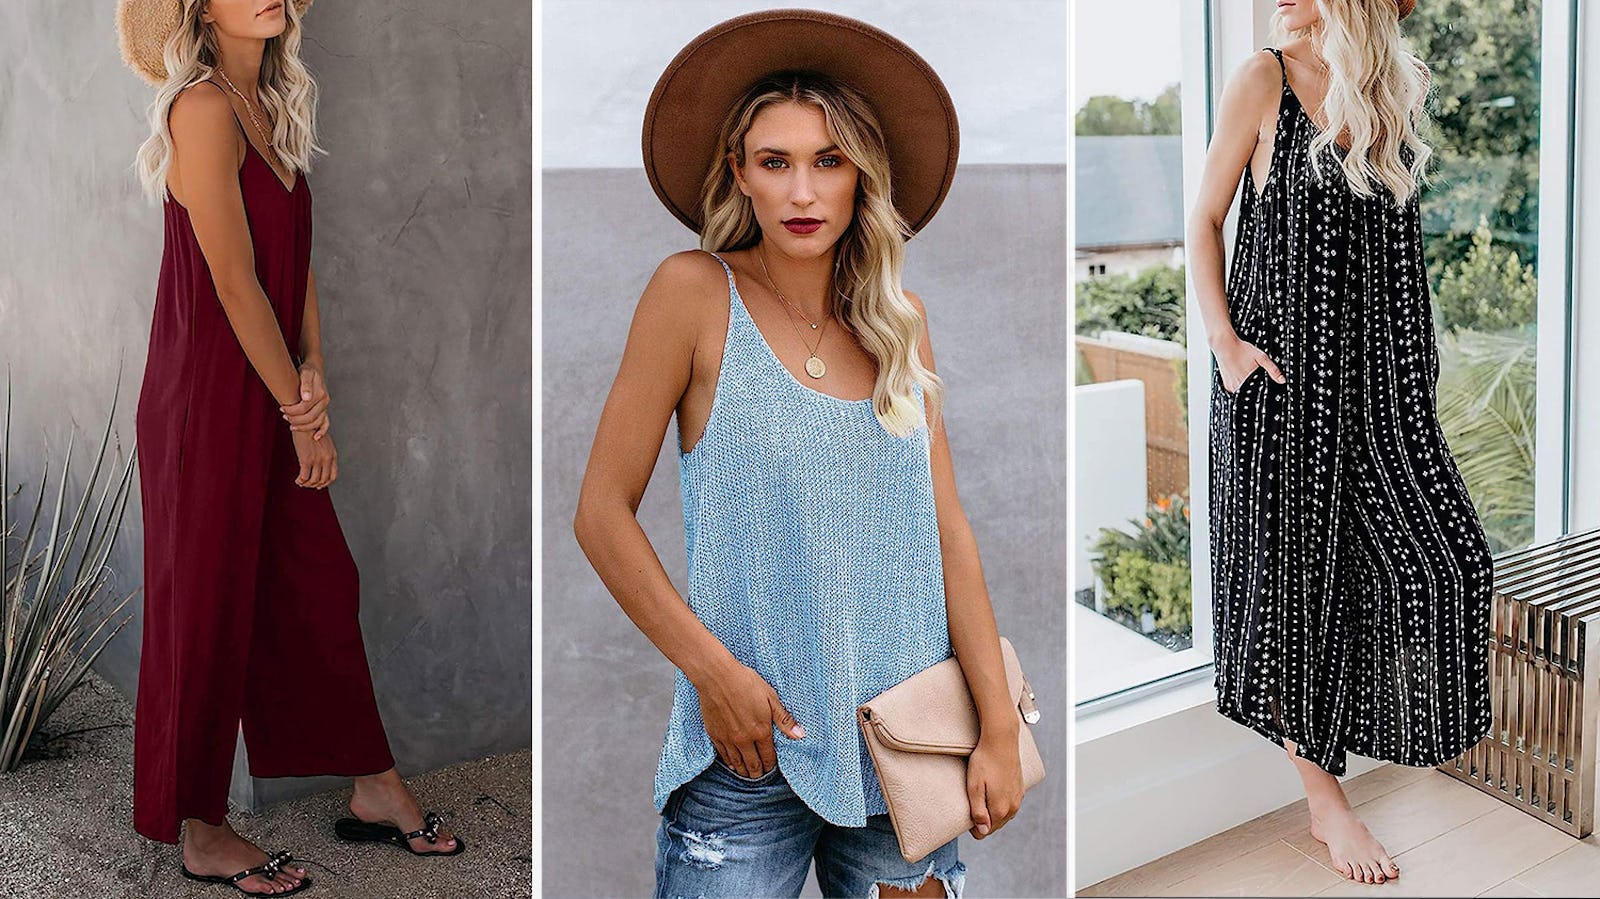 40 Stylish, Loose-Fitting Outfits Under $35 That Look Good On Everyone